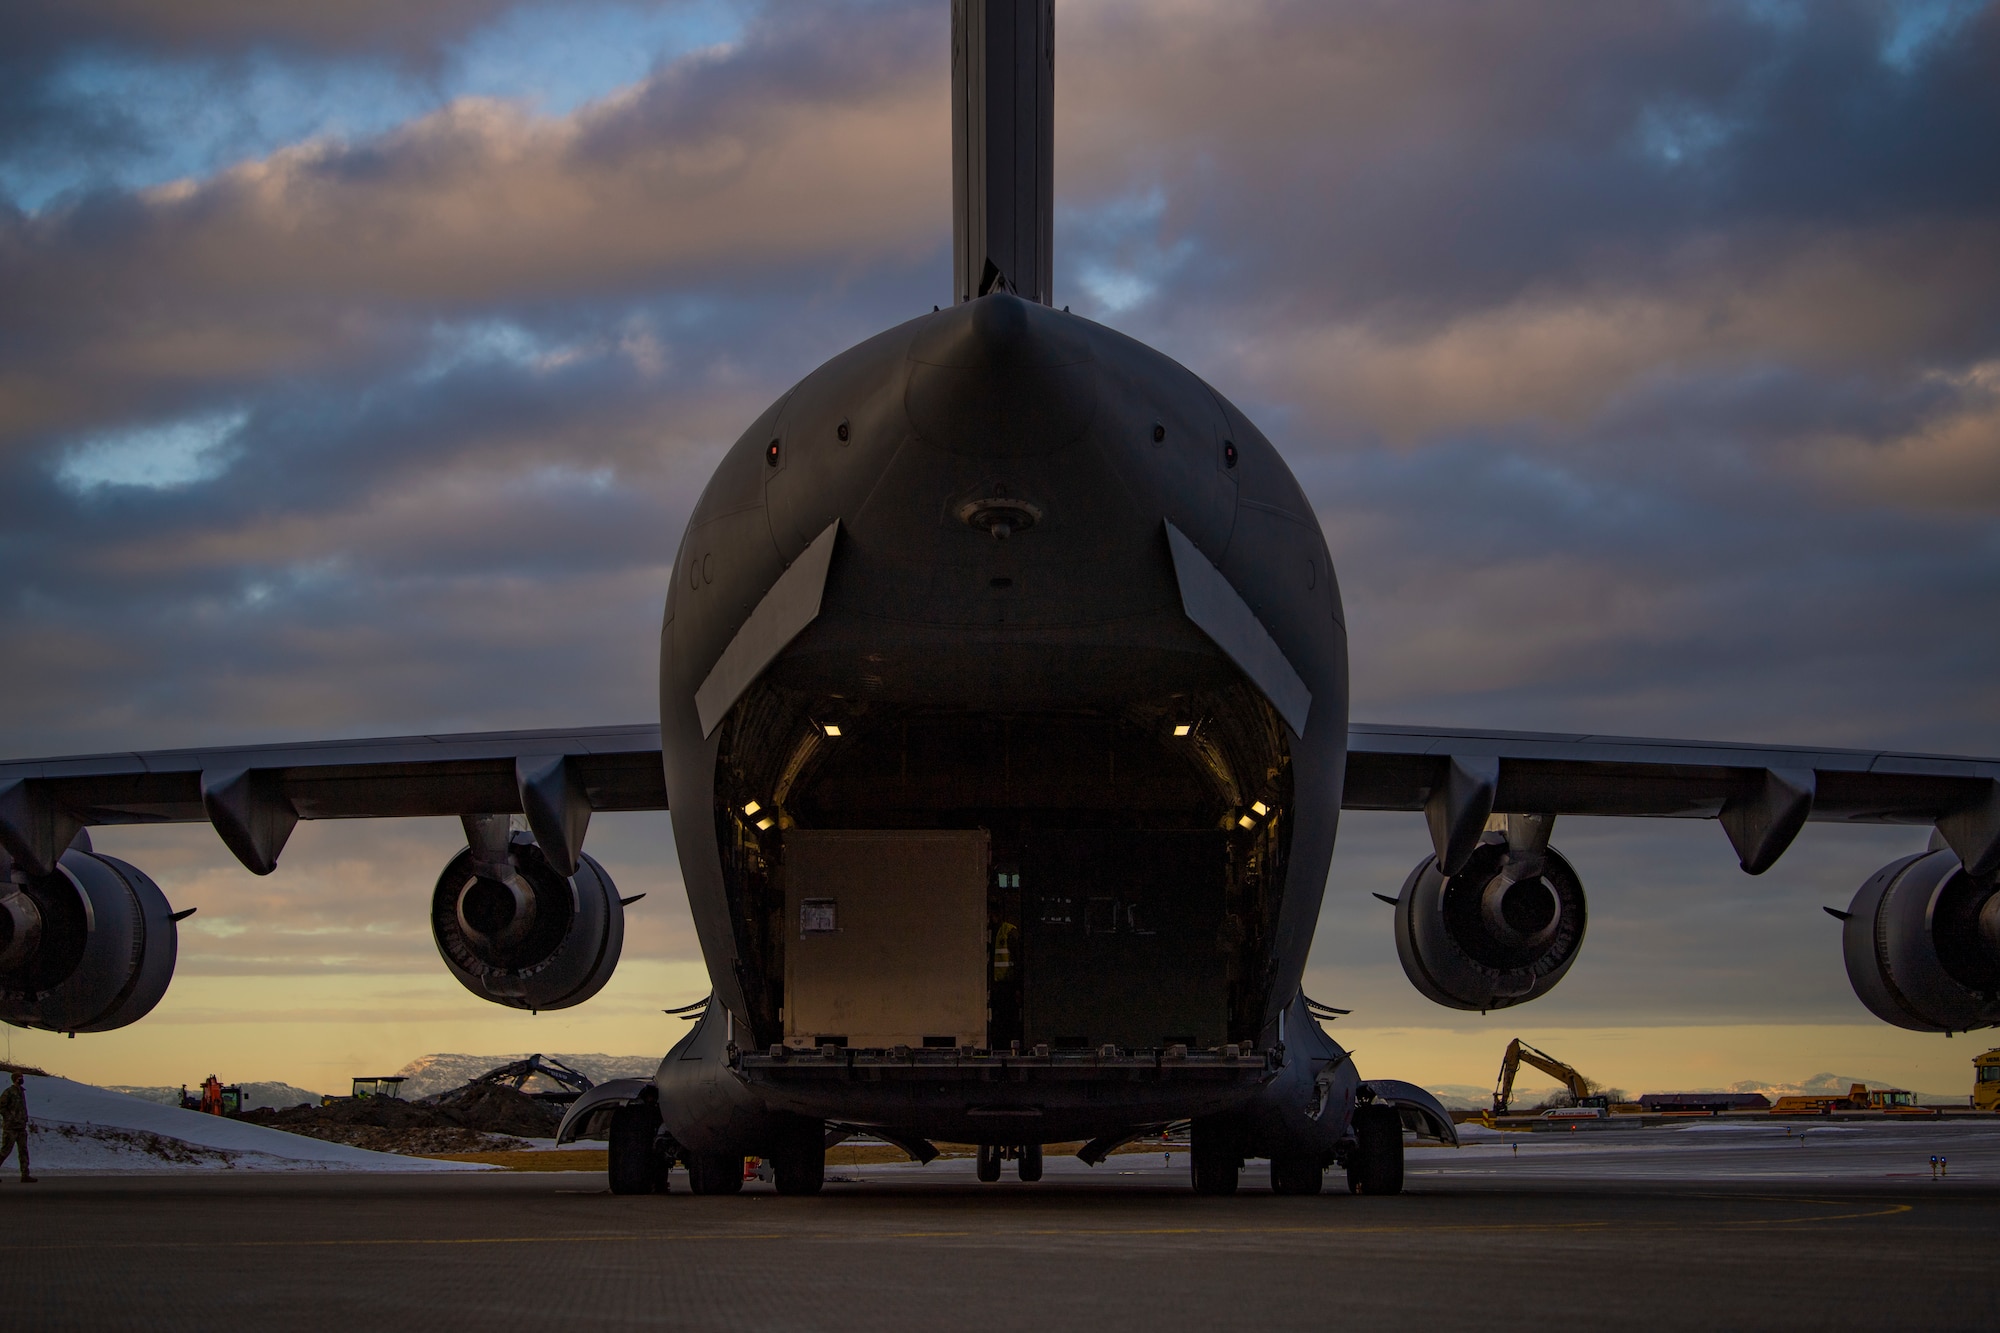 A C-17 Globemaster III, assigned to the 437th Airlift Wing, sits on the flightline at Ørland Air Force Station, Norway, Feb. 23, 2021. The C-17 delivered cargo and equipment needed to ensure success during Bomber Task Force Europe missions. (U.S. Air Force photo by Airman 1st Class Colin Hollowell)